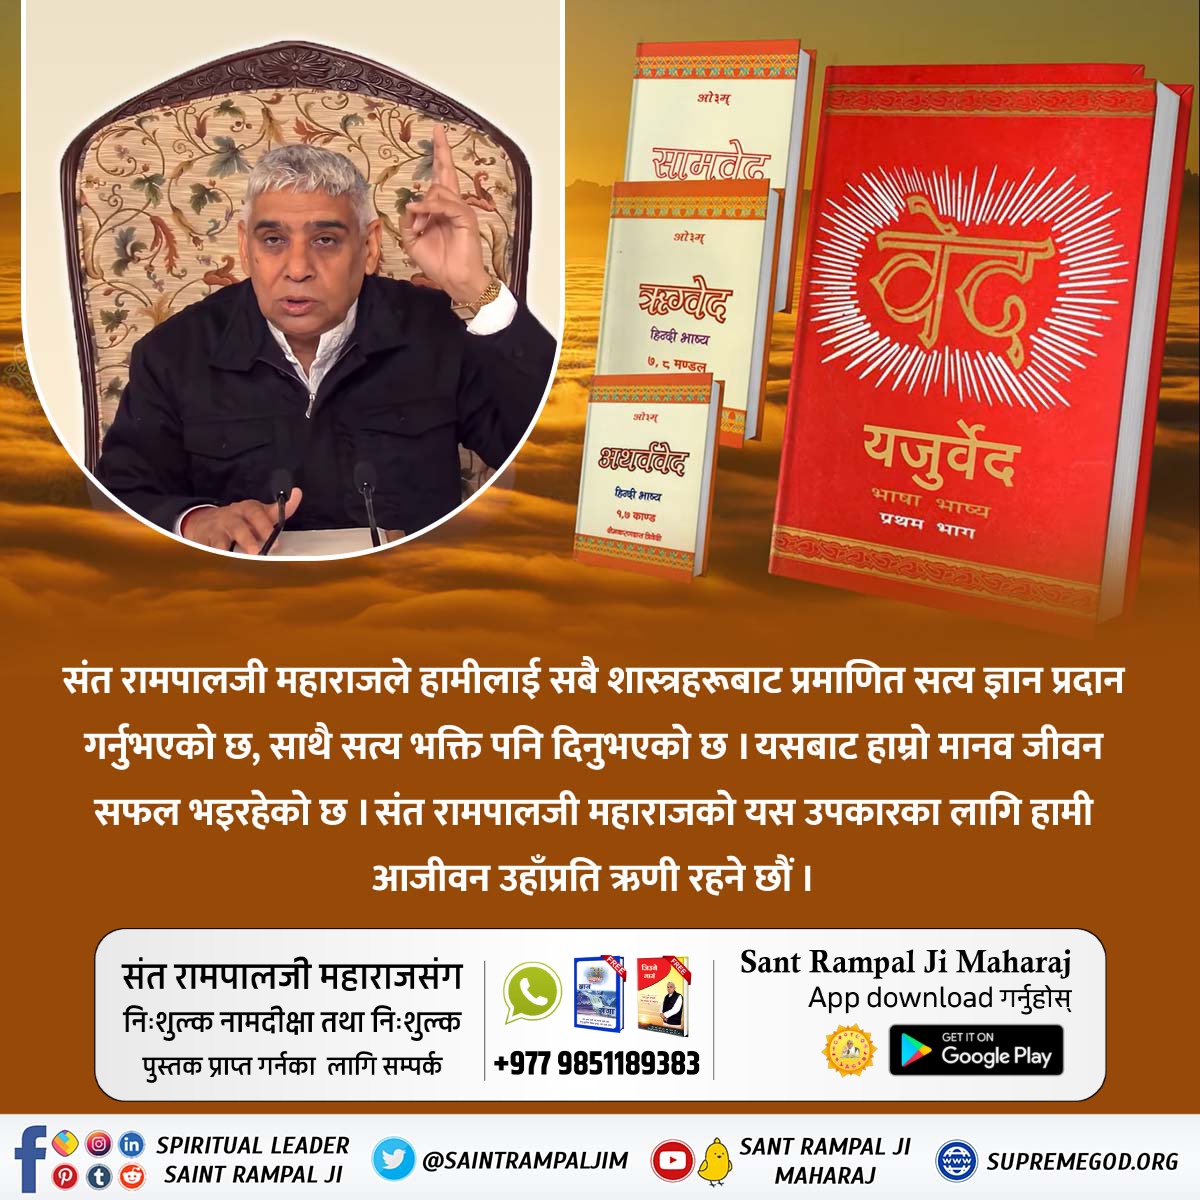 #महान_परोपकारी_संतरामपालजी
Today in this world there is no knowledge and no solution. If not, the knowledge of Saint Rampalji is tile in some way.